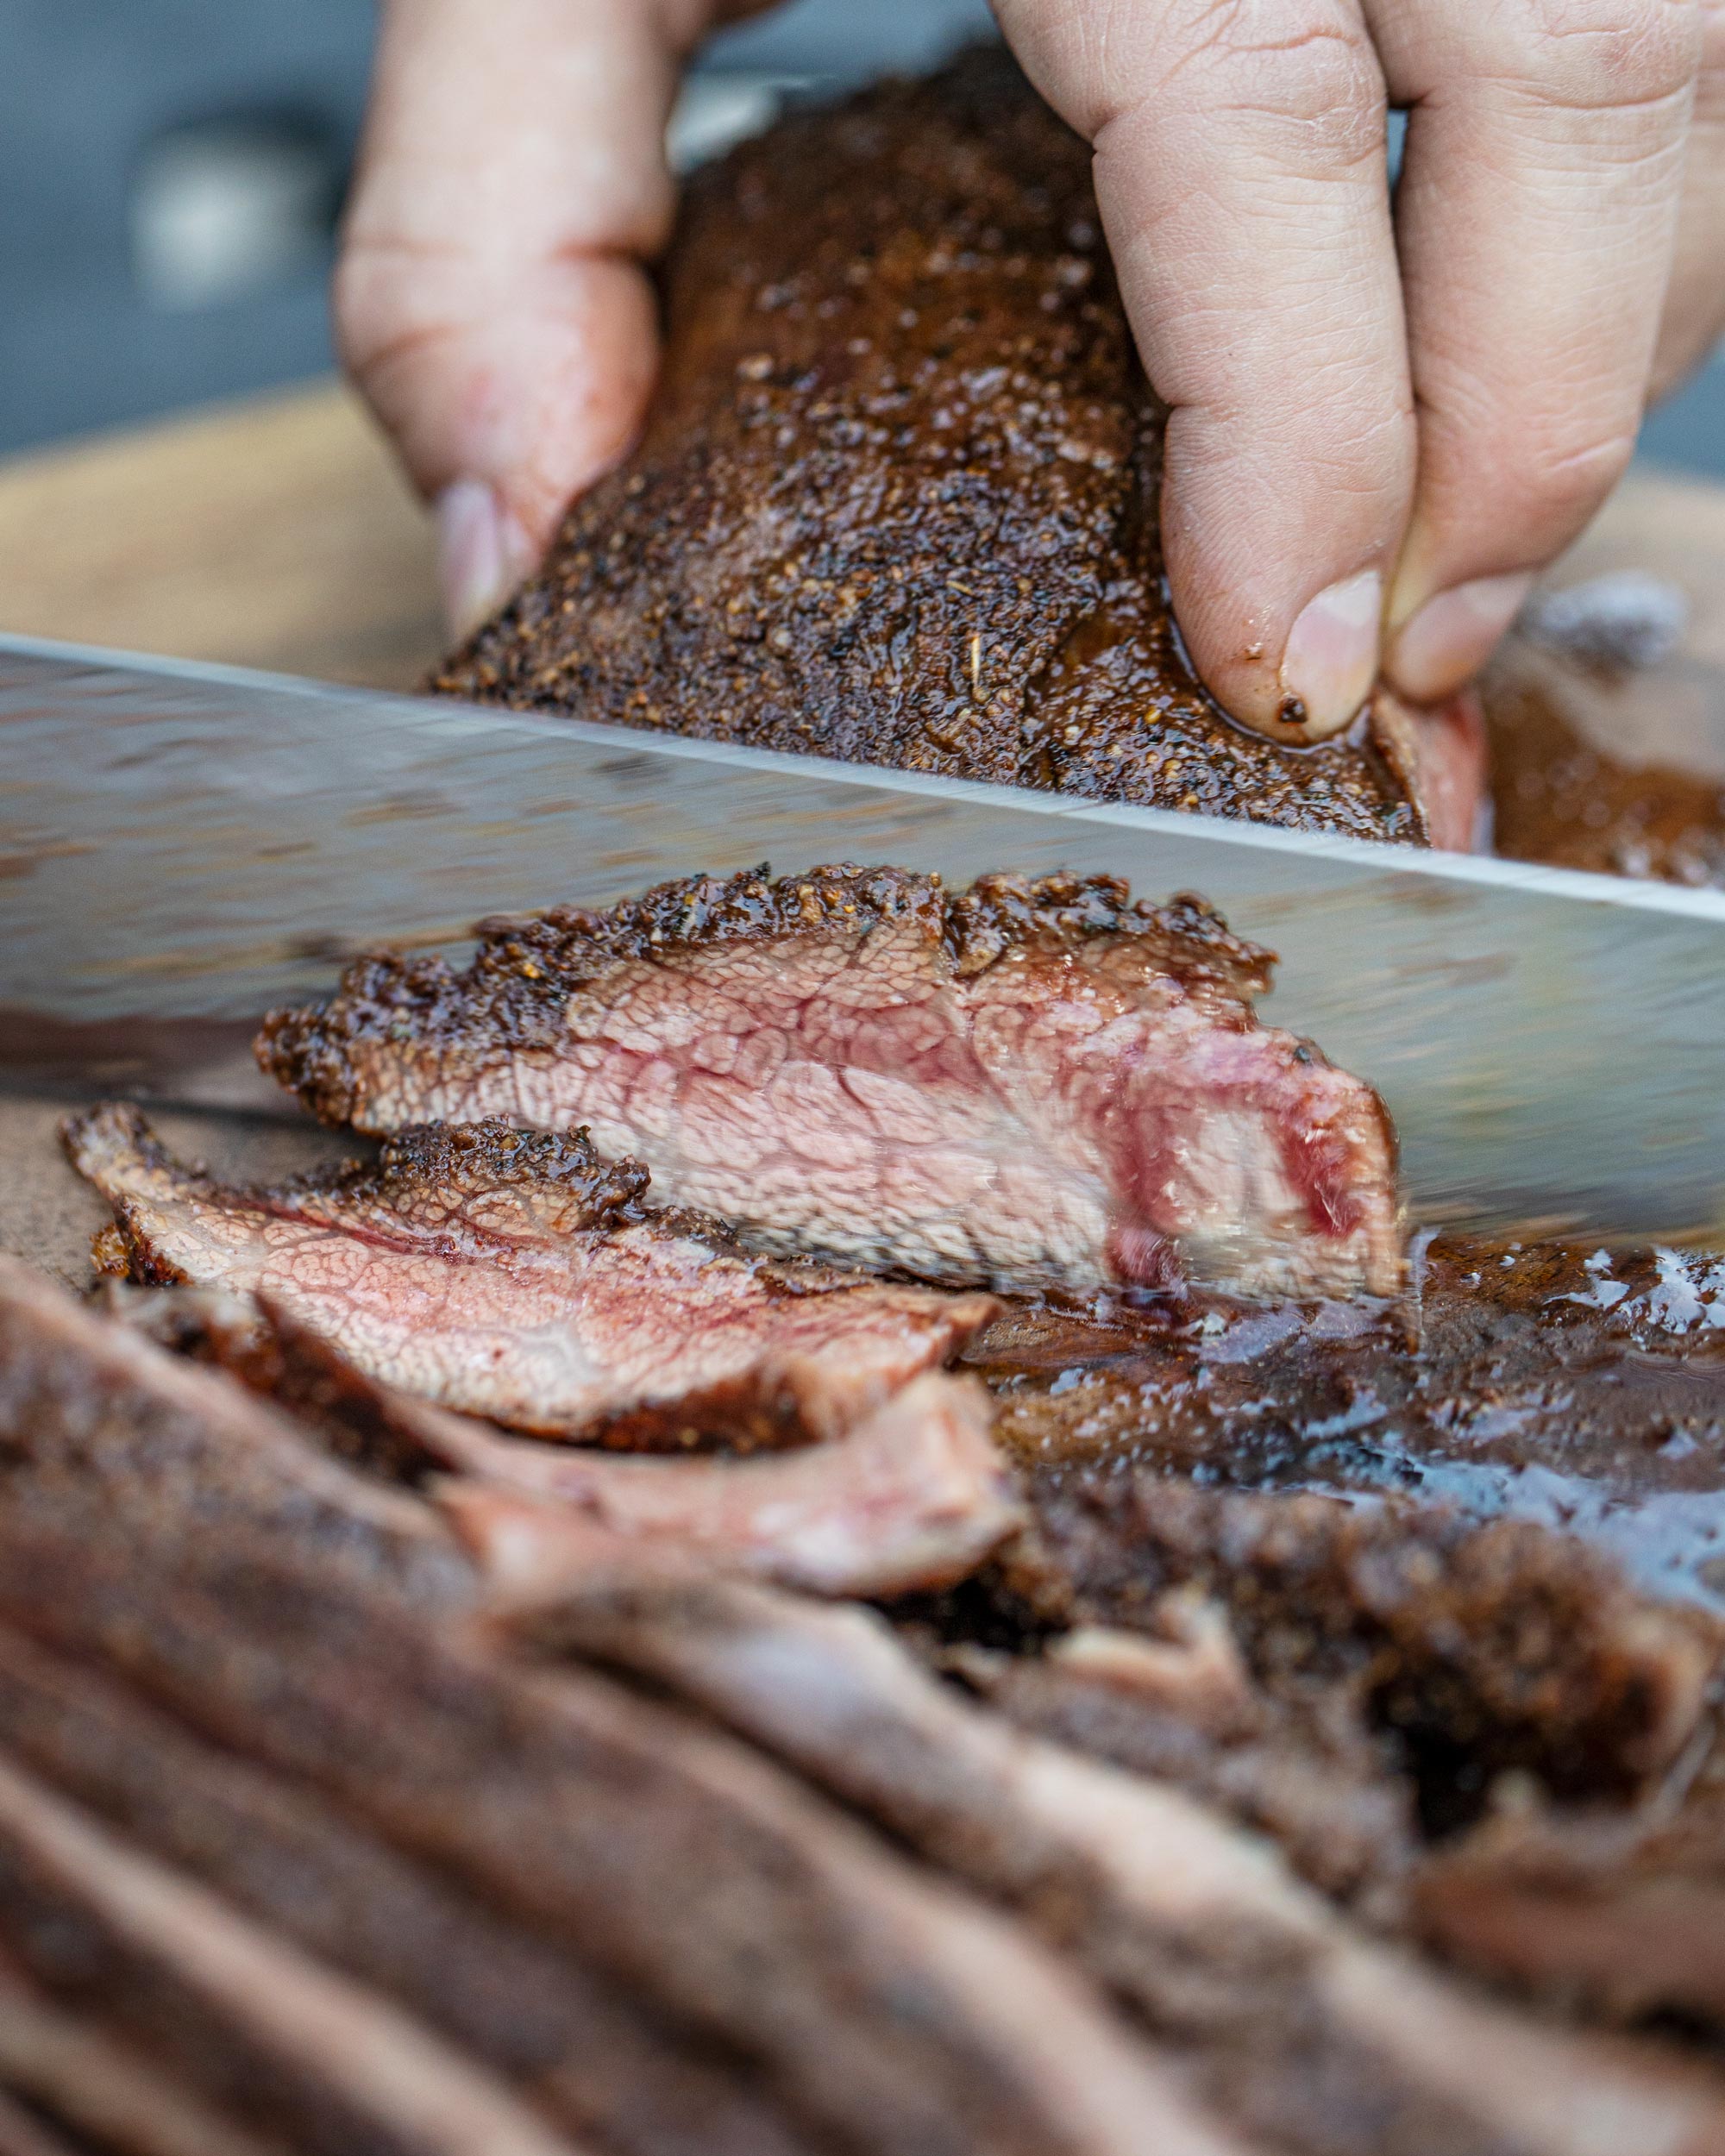 Slicing into the flank steak.